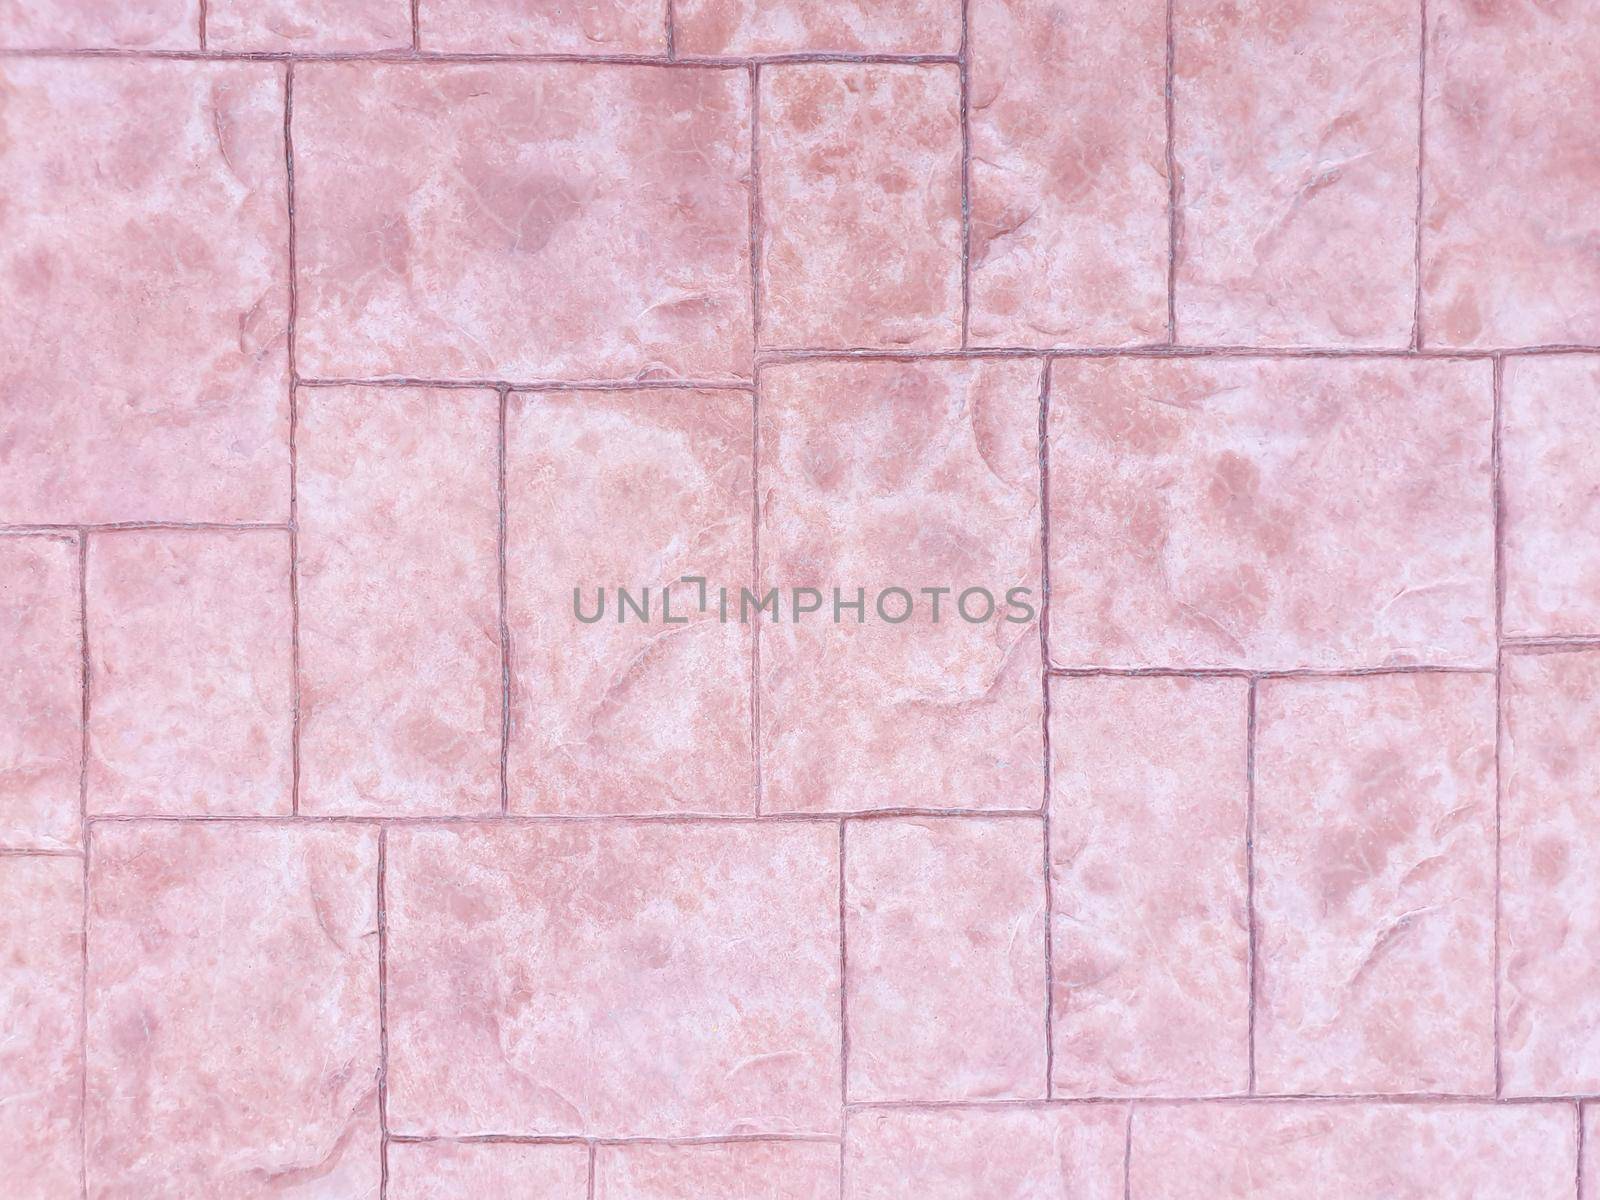 Brick wall or floor texture surface background by NongEngEng